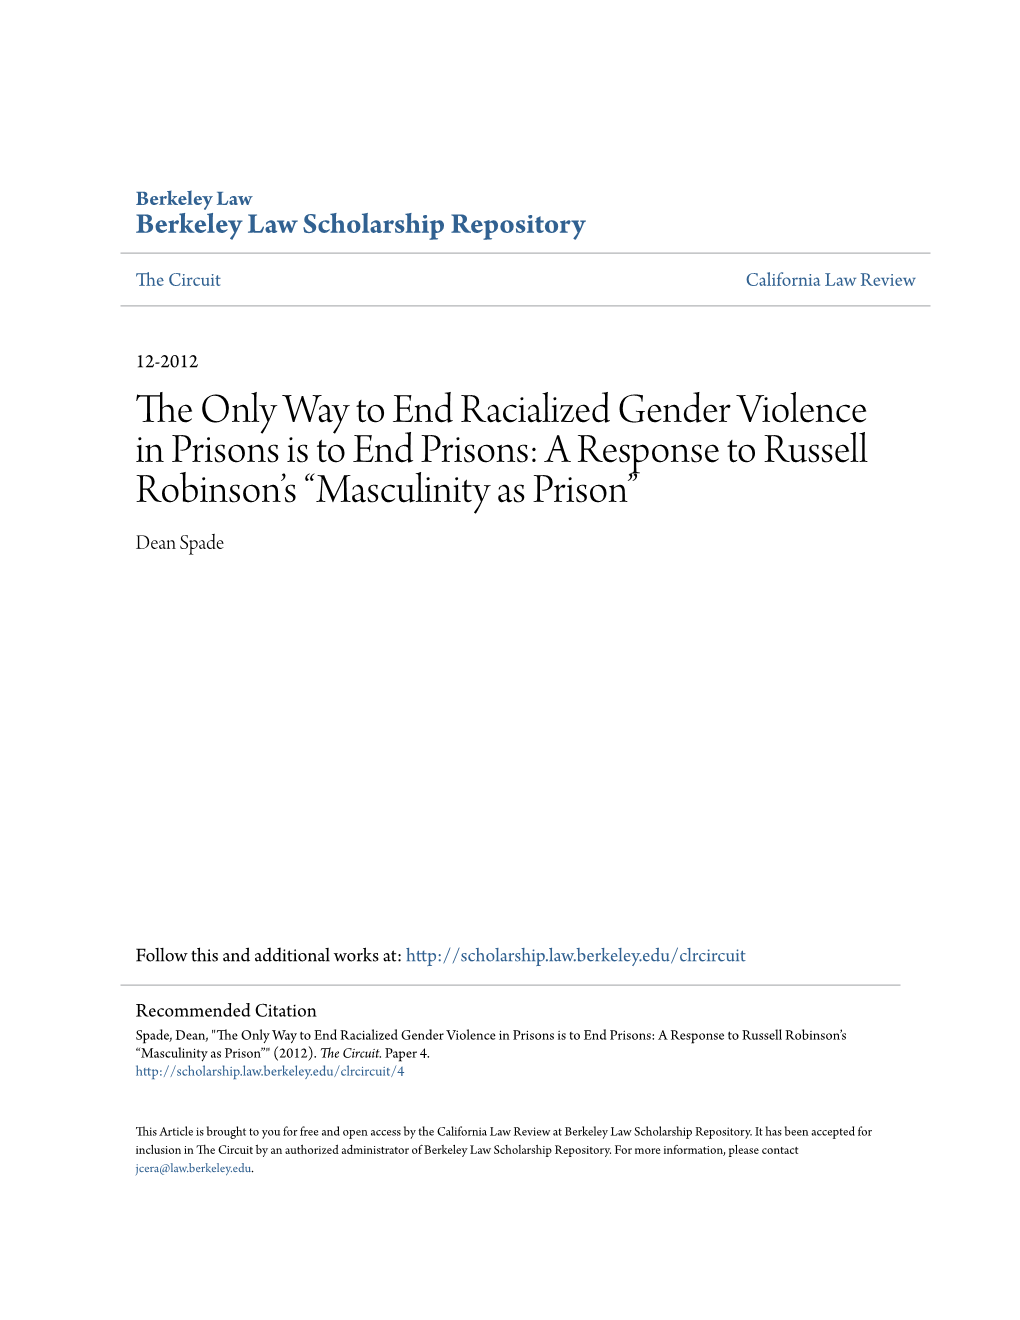 The Only Way to End Racialized Gender Violence in Prisons Is to End Prisons: a Response to Russell Robinson’S “Masculinity As Prison” Dean Spade